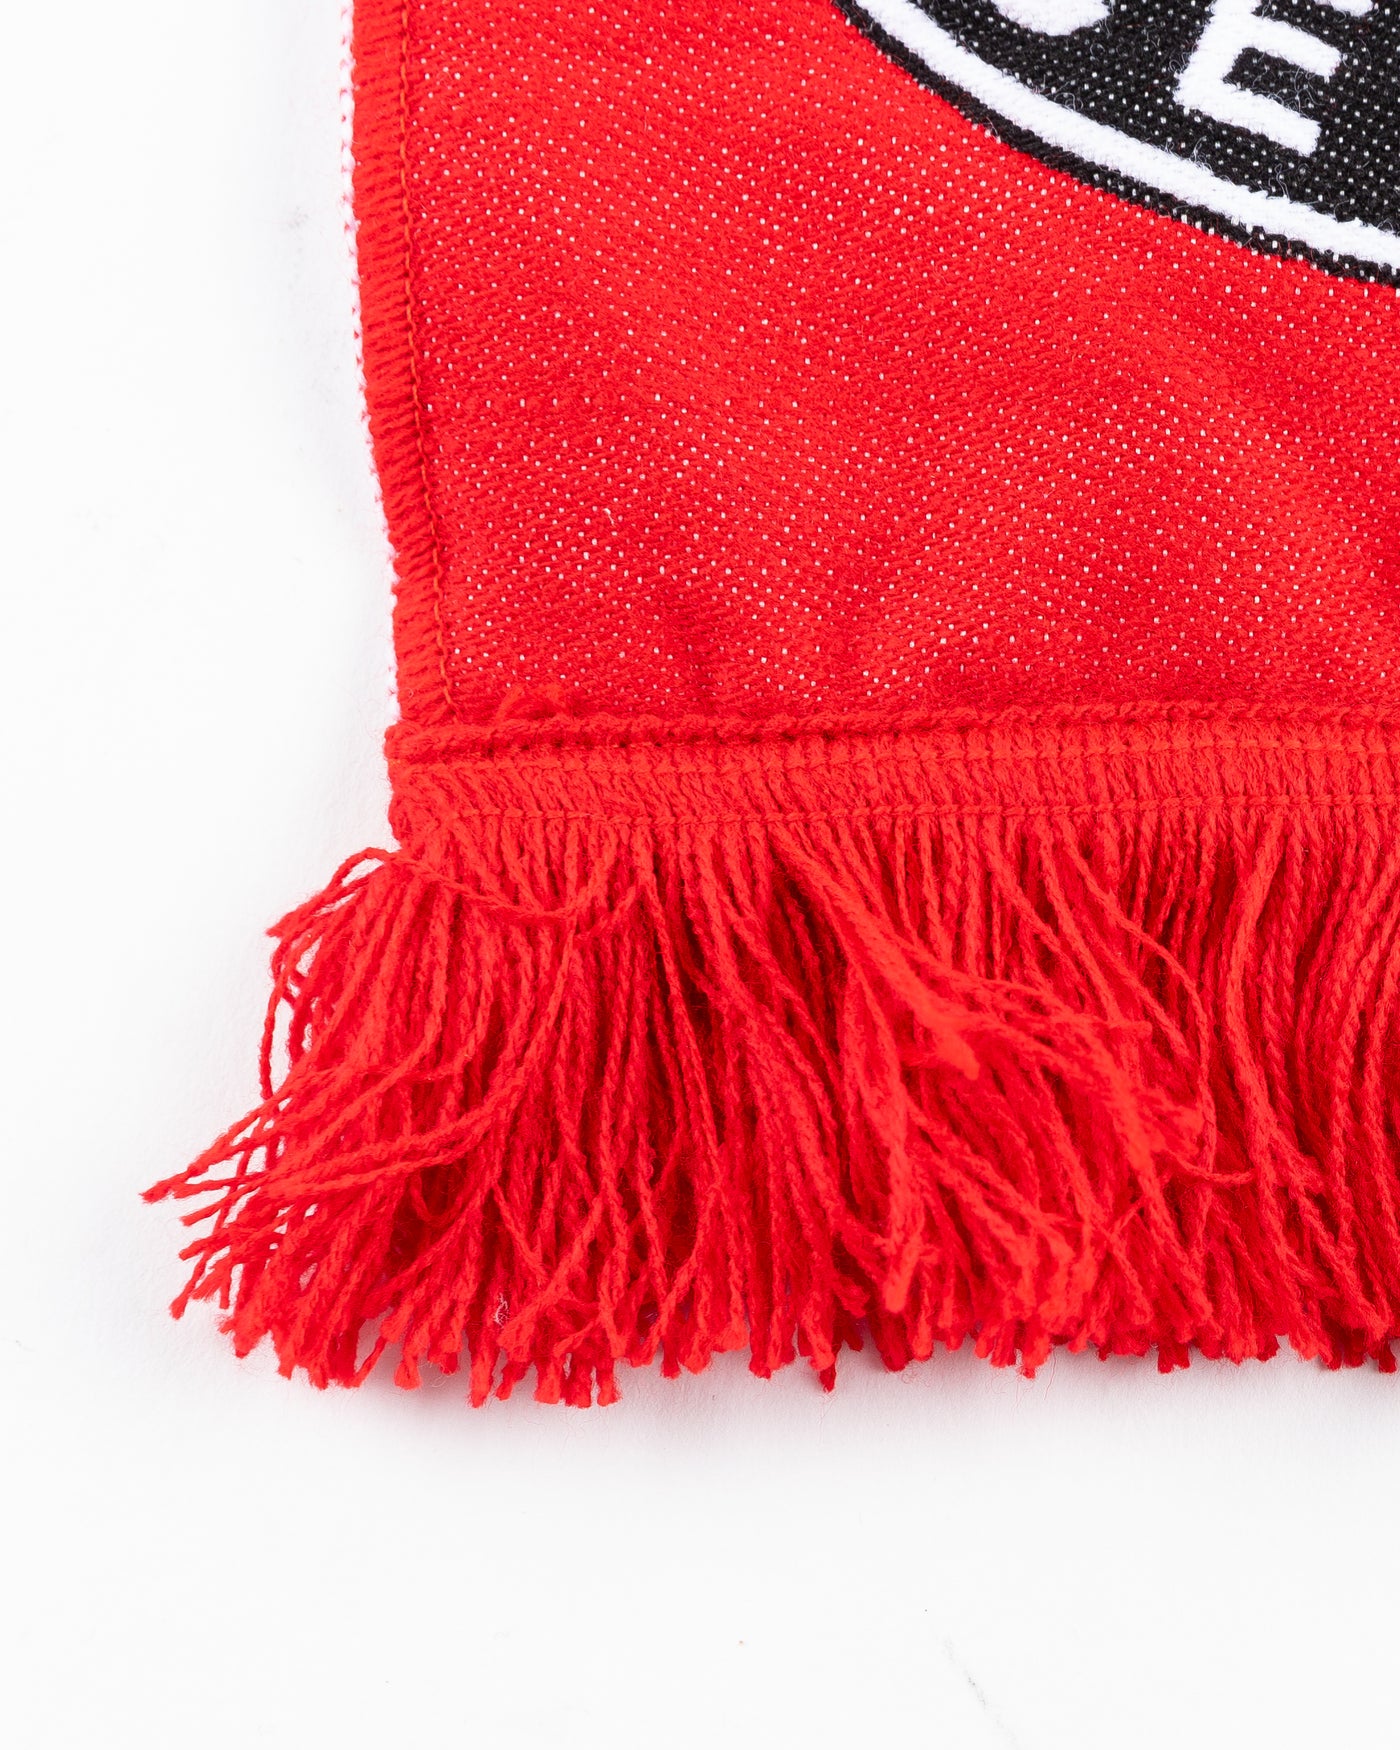 red Rockford IceHogs scarf with wordmark, logo and secondary Chicago Blackhawks logo - detail fringe lay flat